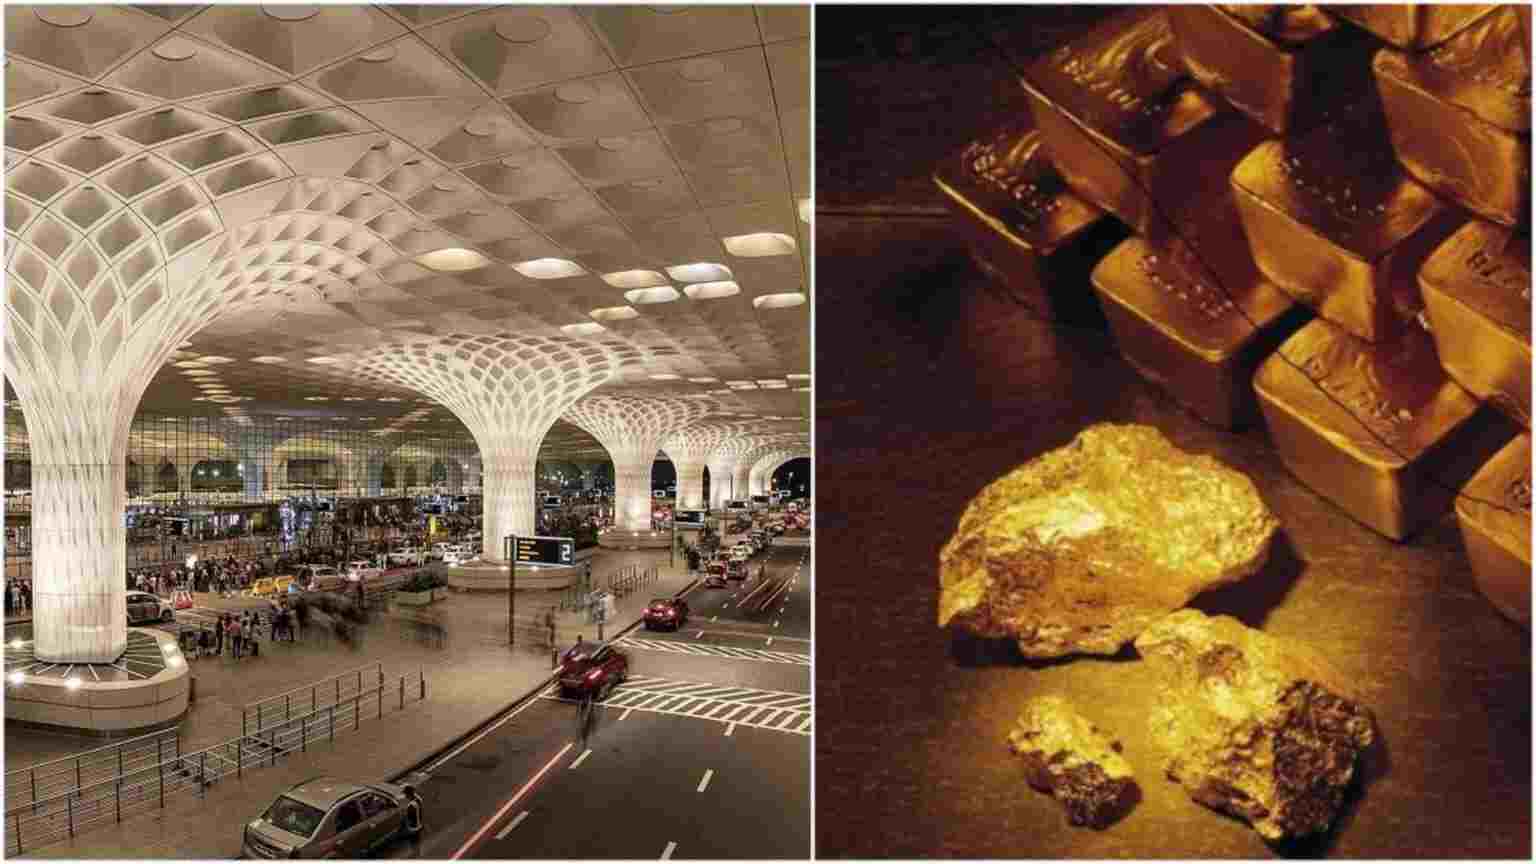 Thief on Mumbai airport caught; Tried to smuggle gold through date boxes